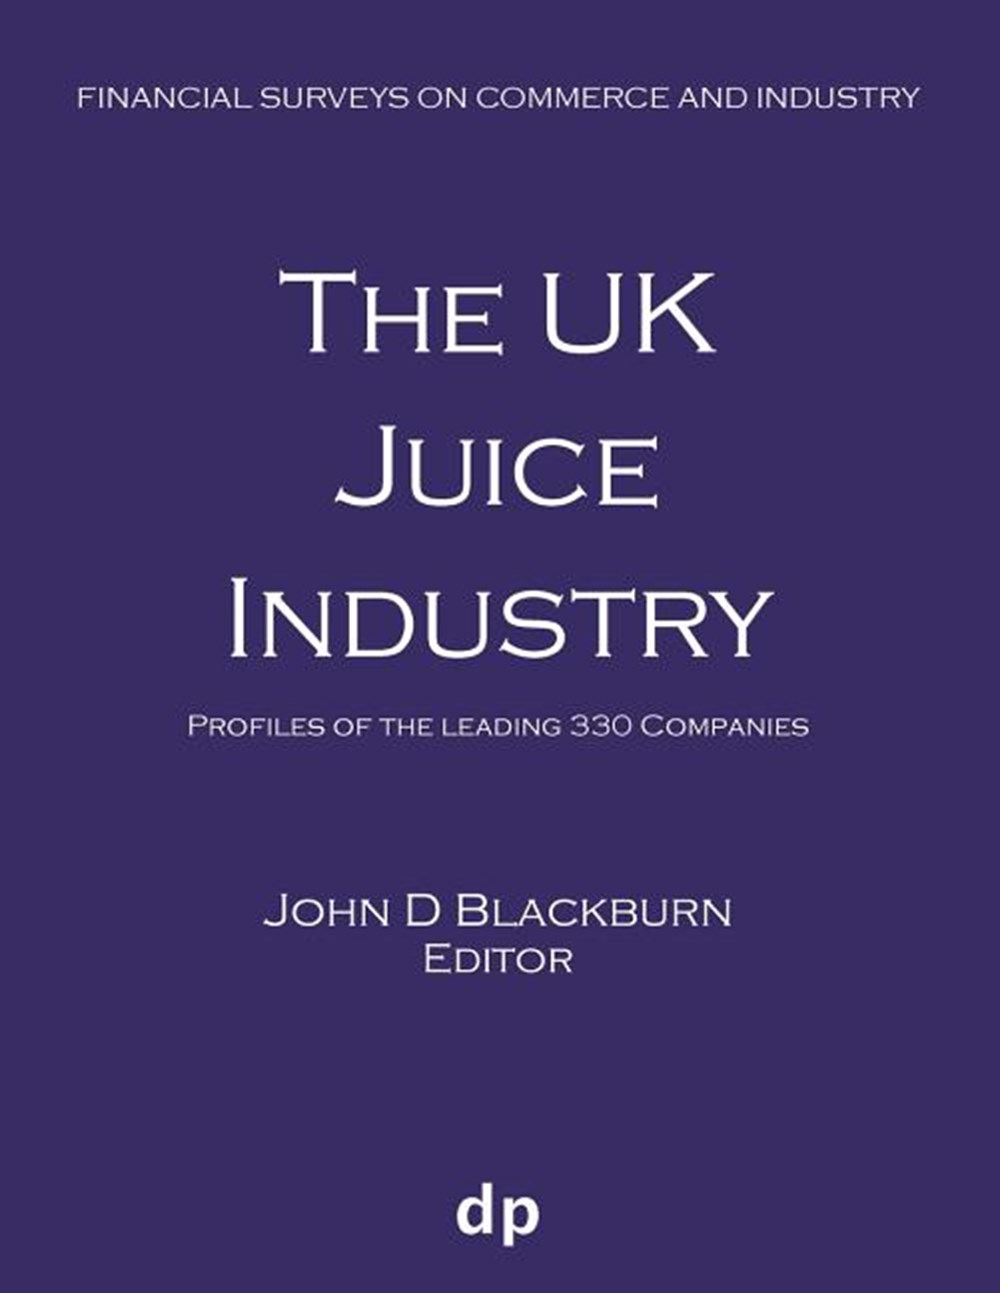 UK Juice Industry: Profiles of the leading 330 companies (Spring 2019)